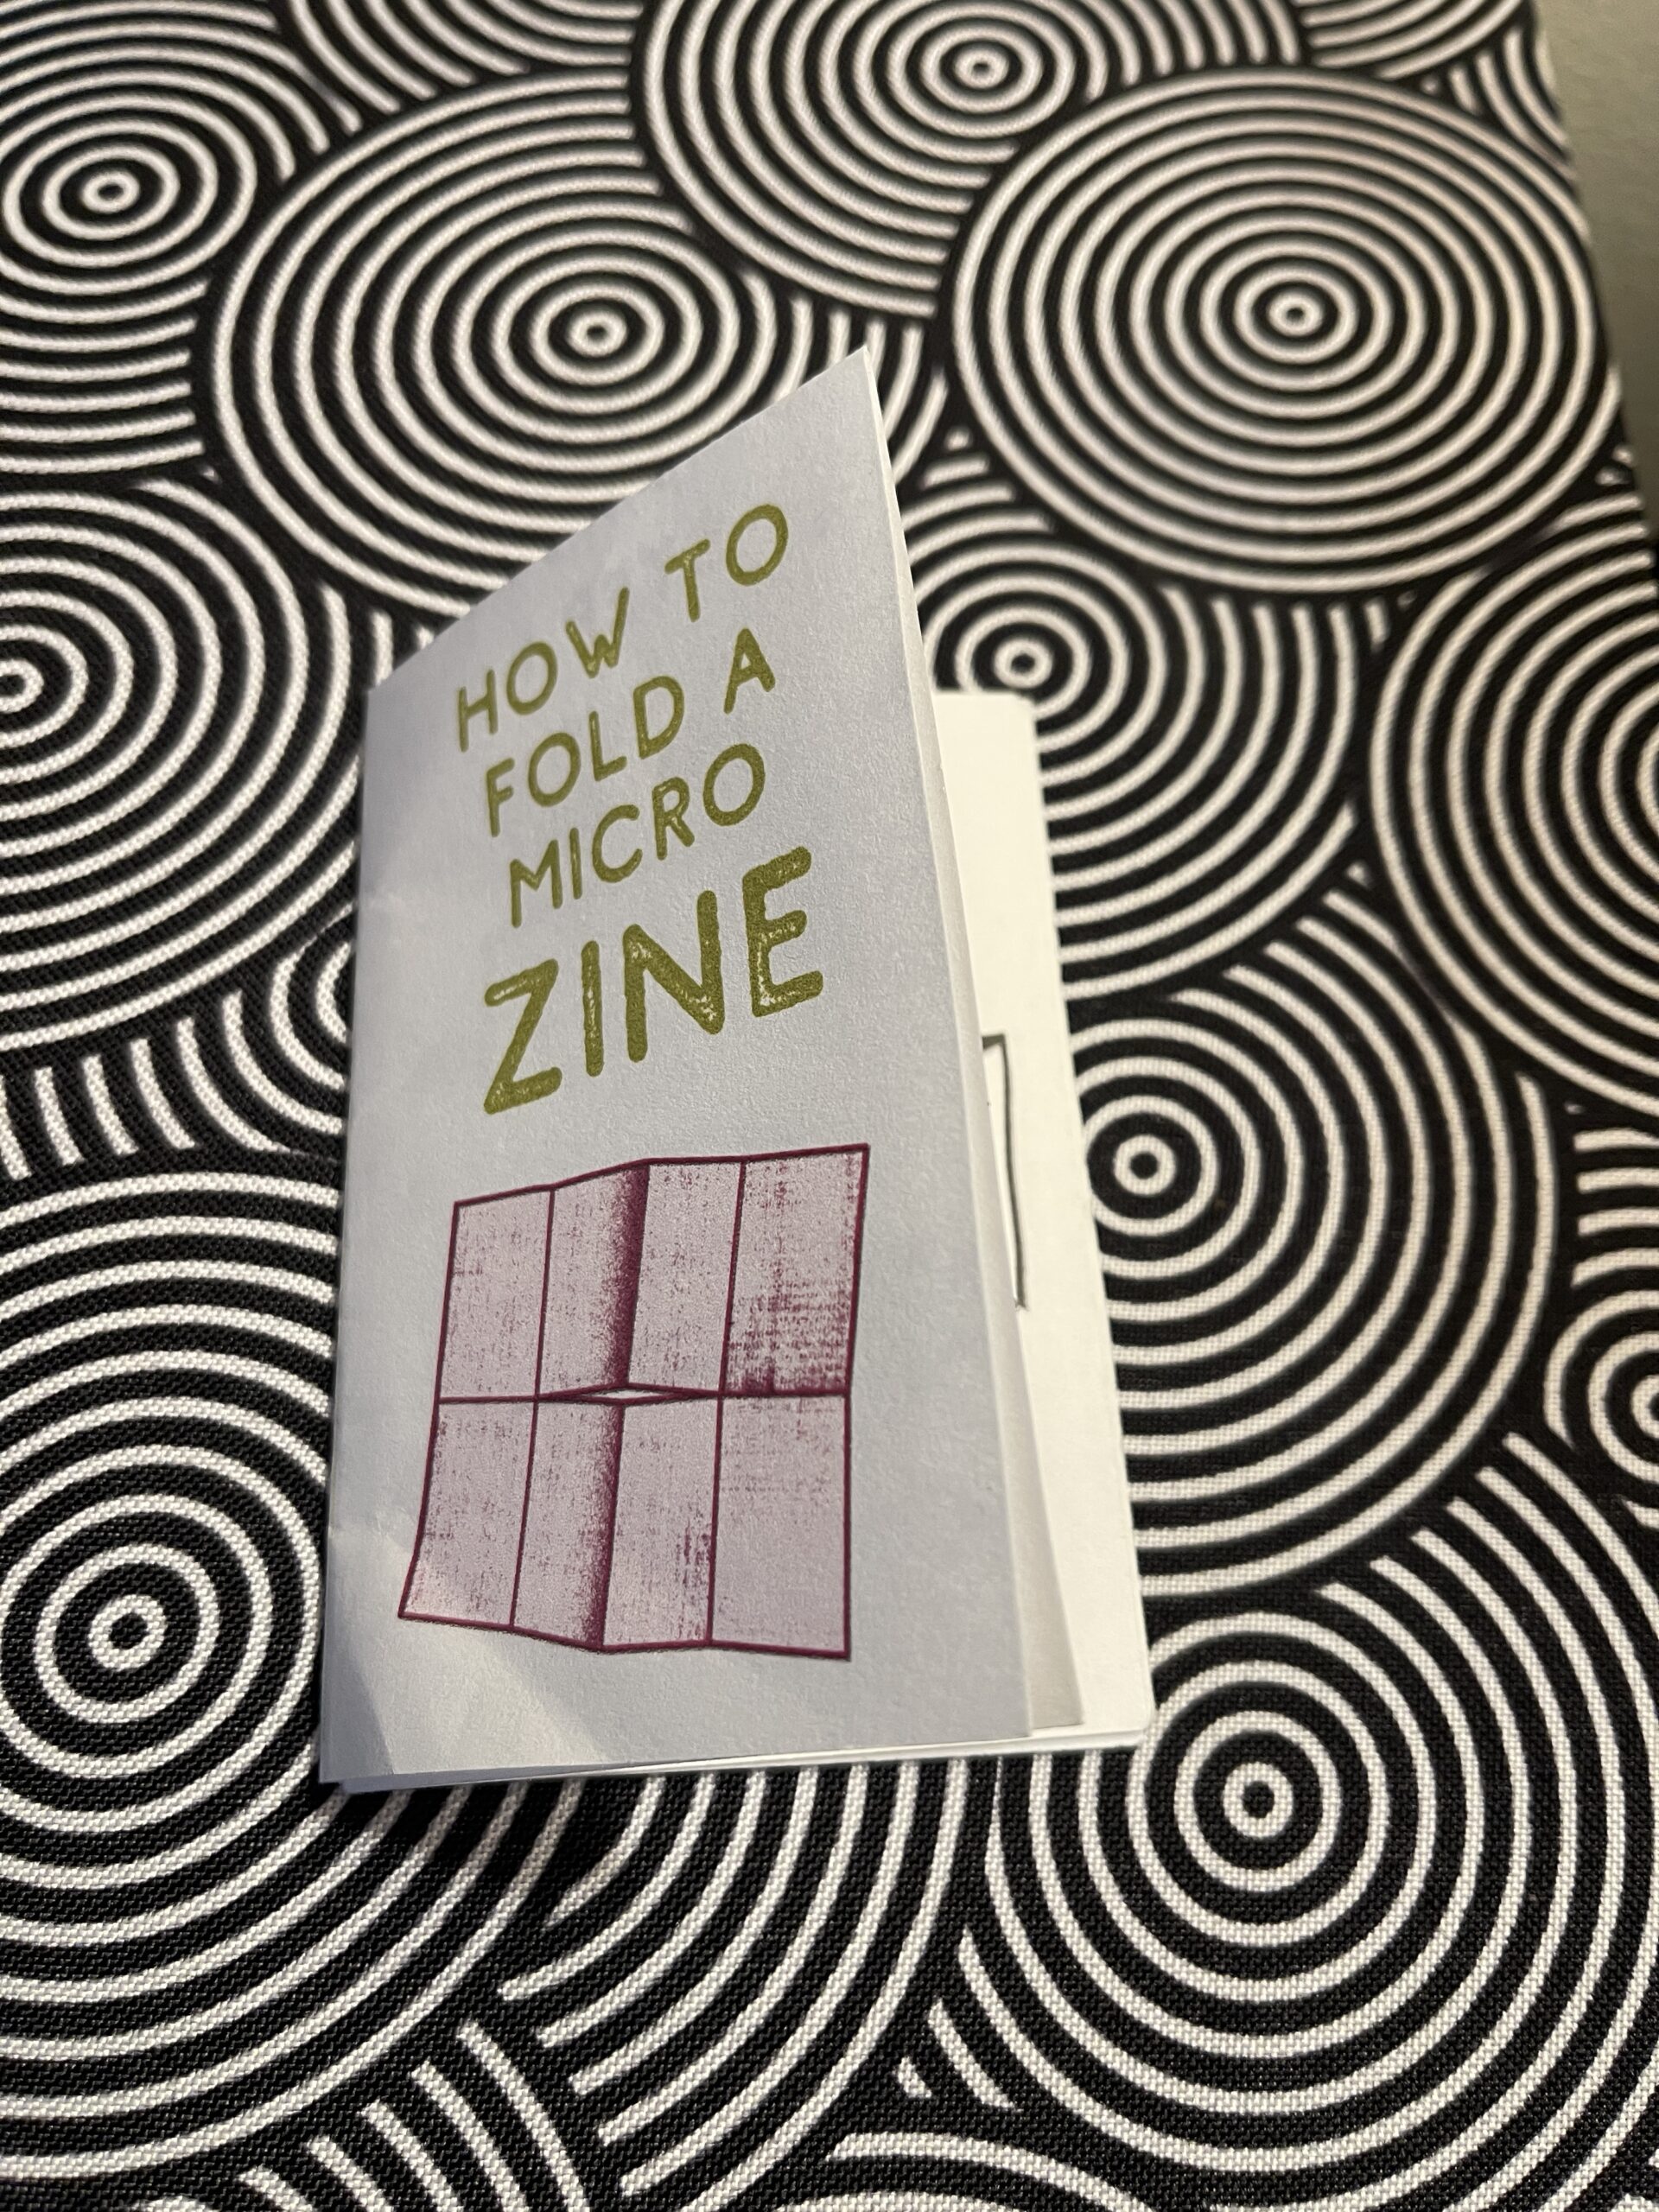 How to Fold a Micro Zine